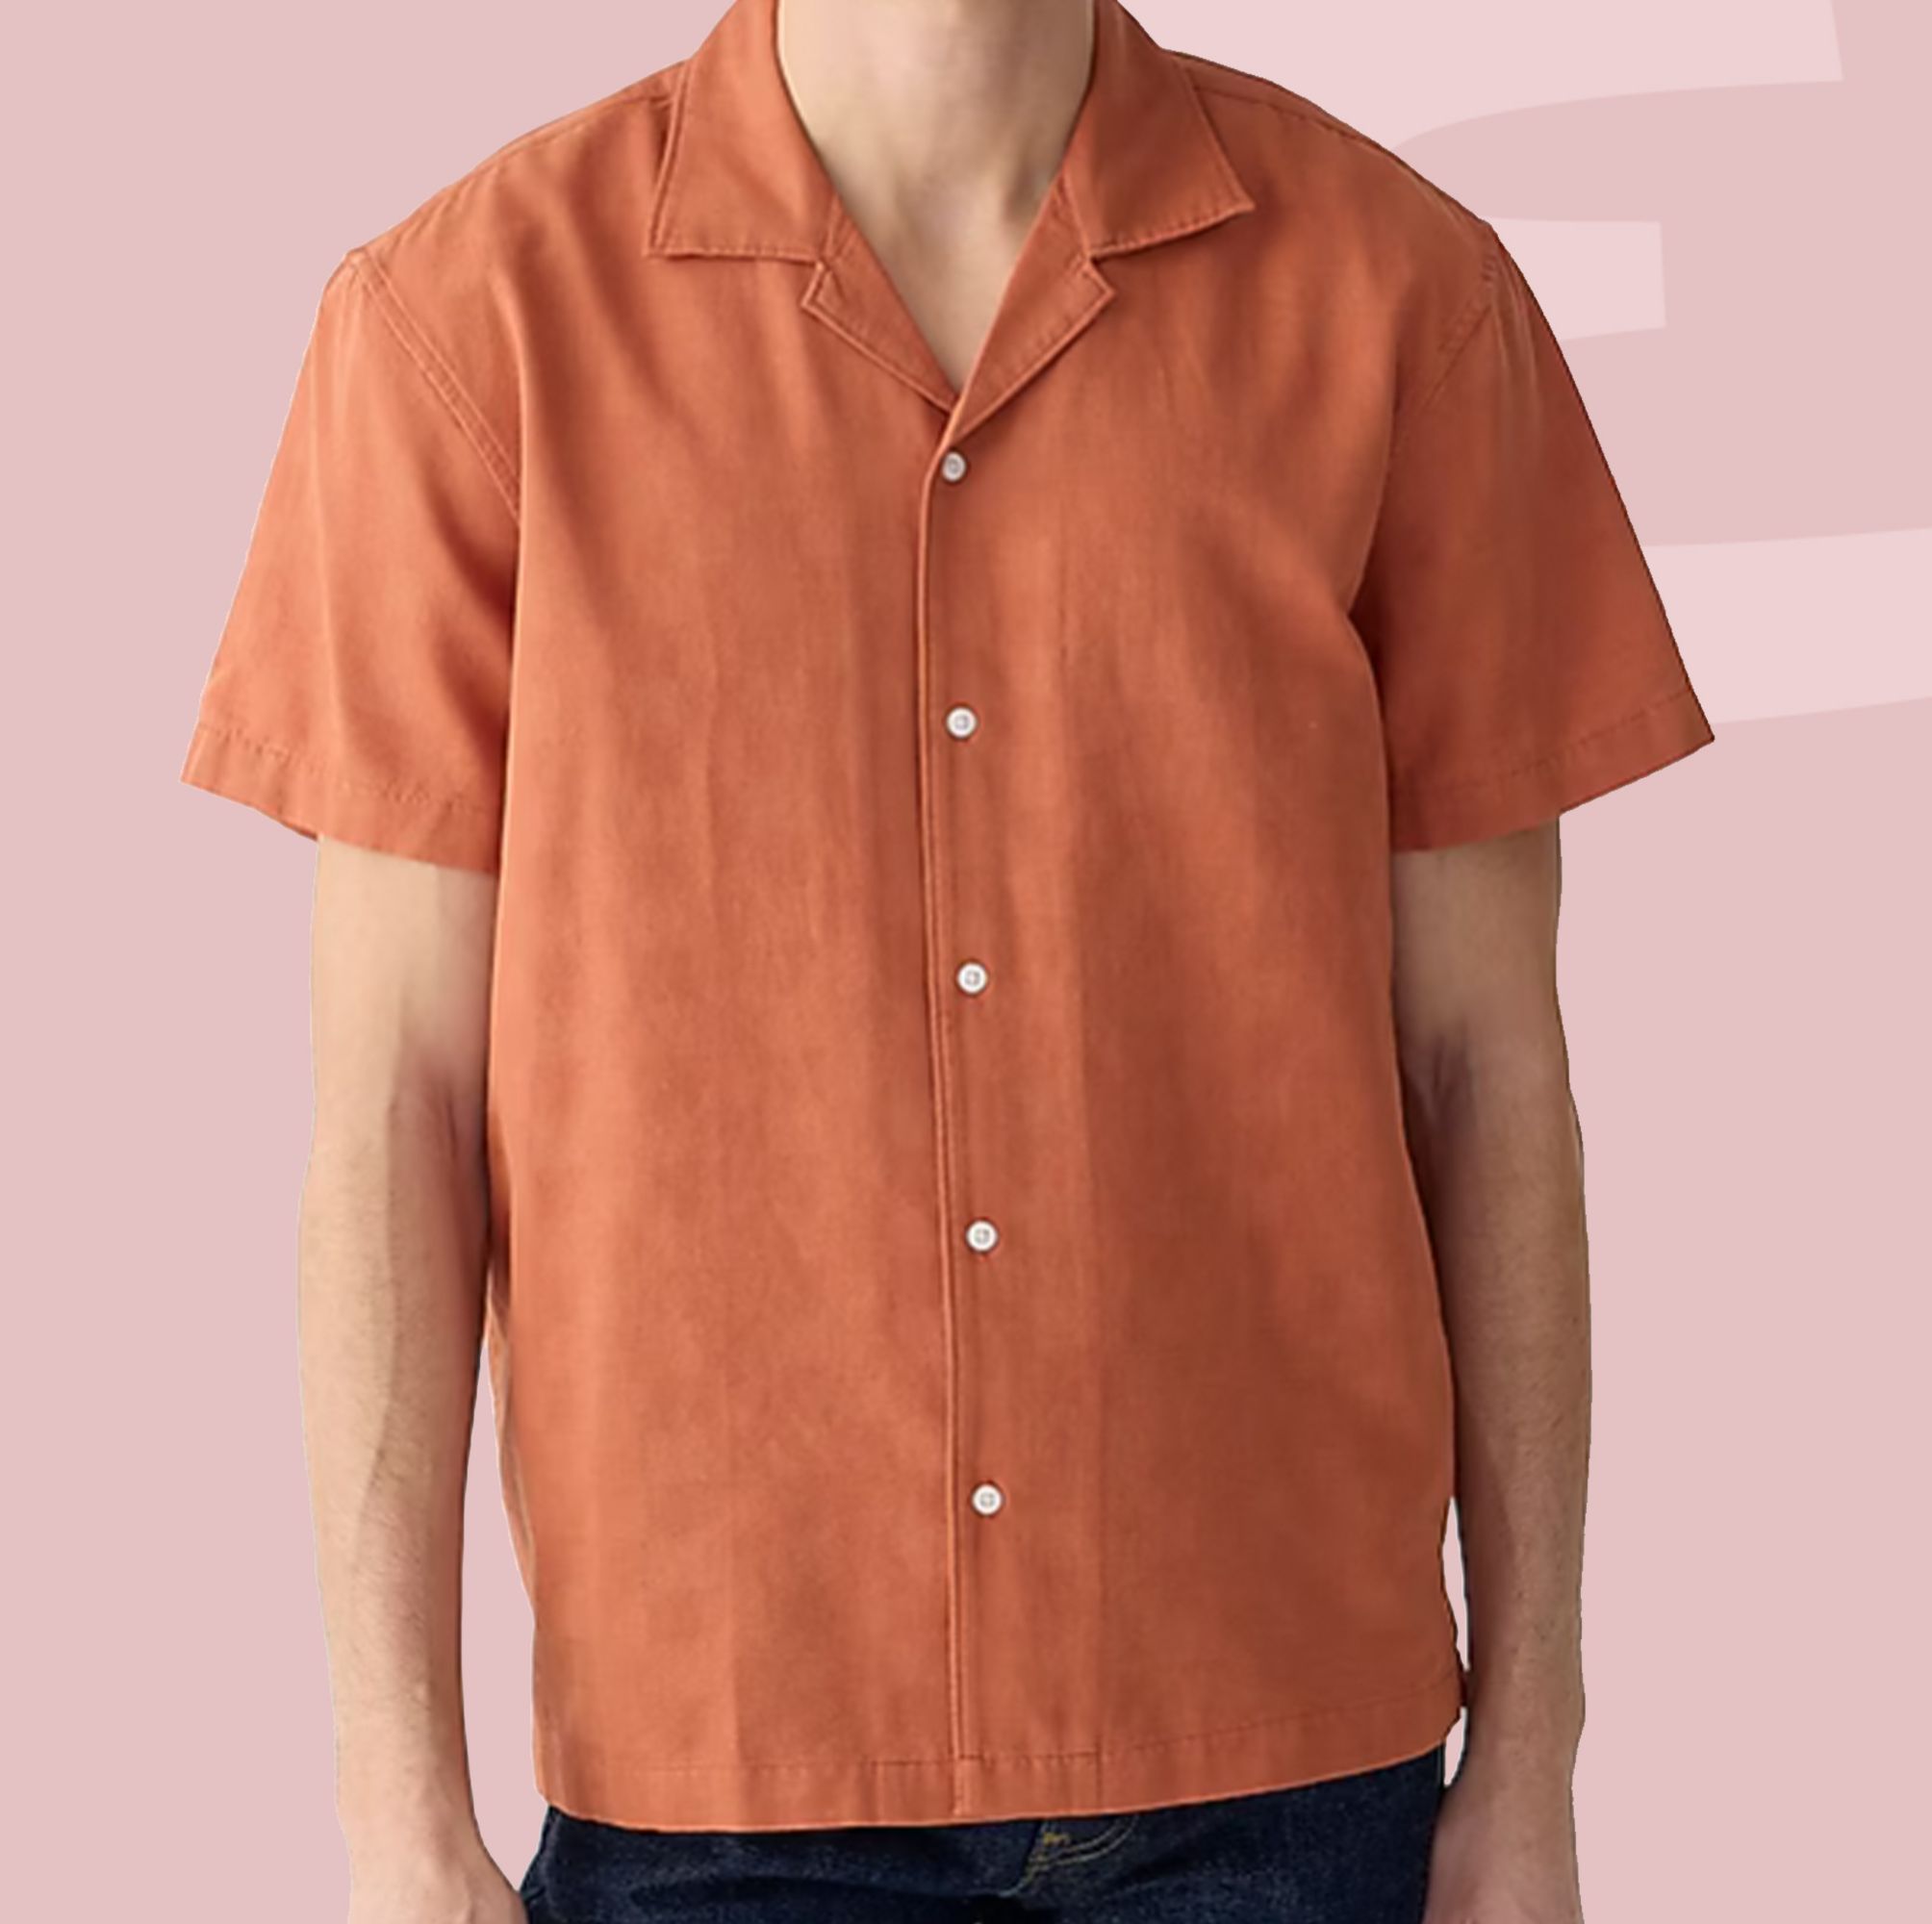 Camp-Collar Shirts Are Essential for Summer. Here Are 24 of the Best Ones.